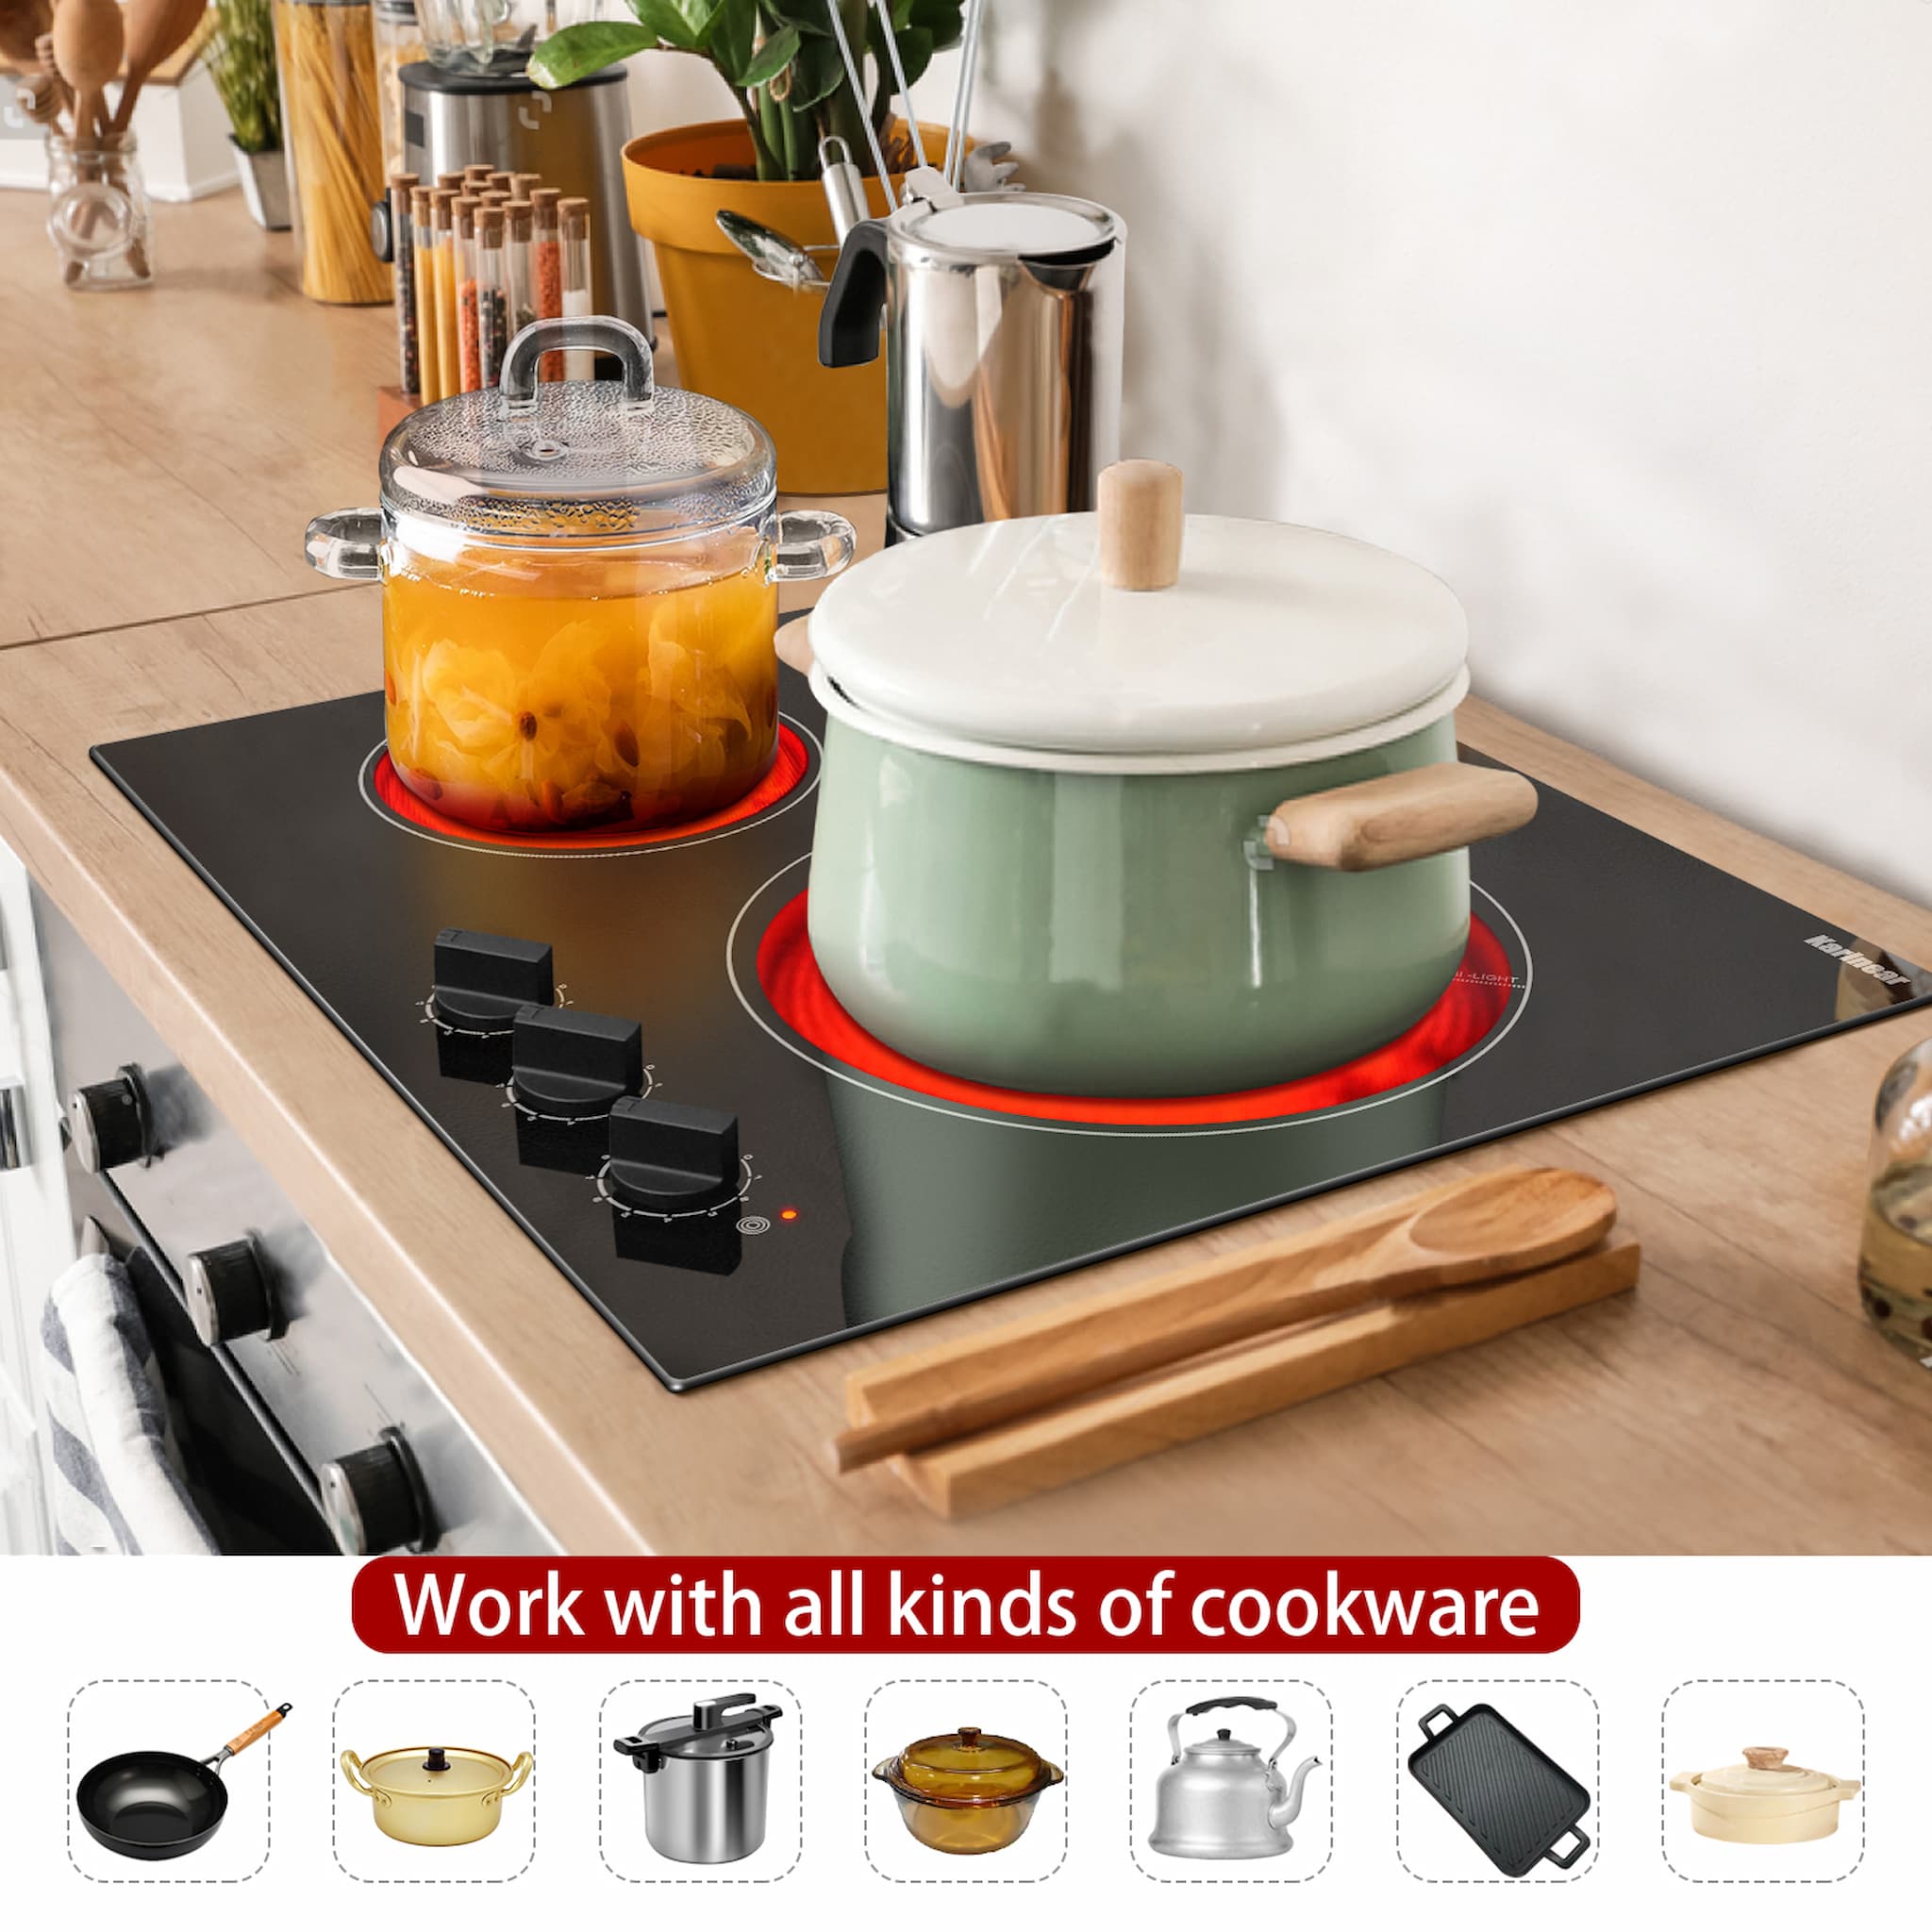 Which Pans Are Suitable for Ceramic-Glass Cooktops?